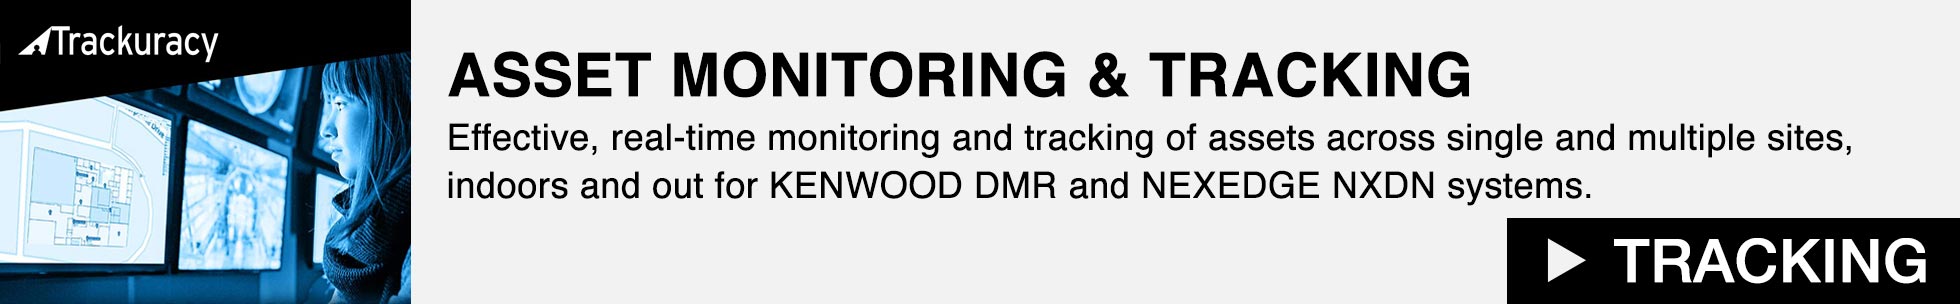 Trackuracy Positioning and Tracking for KENWOOD DMR and NXDN systems